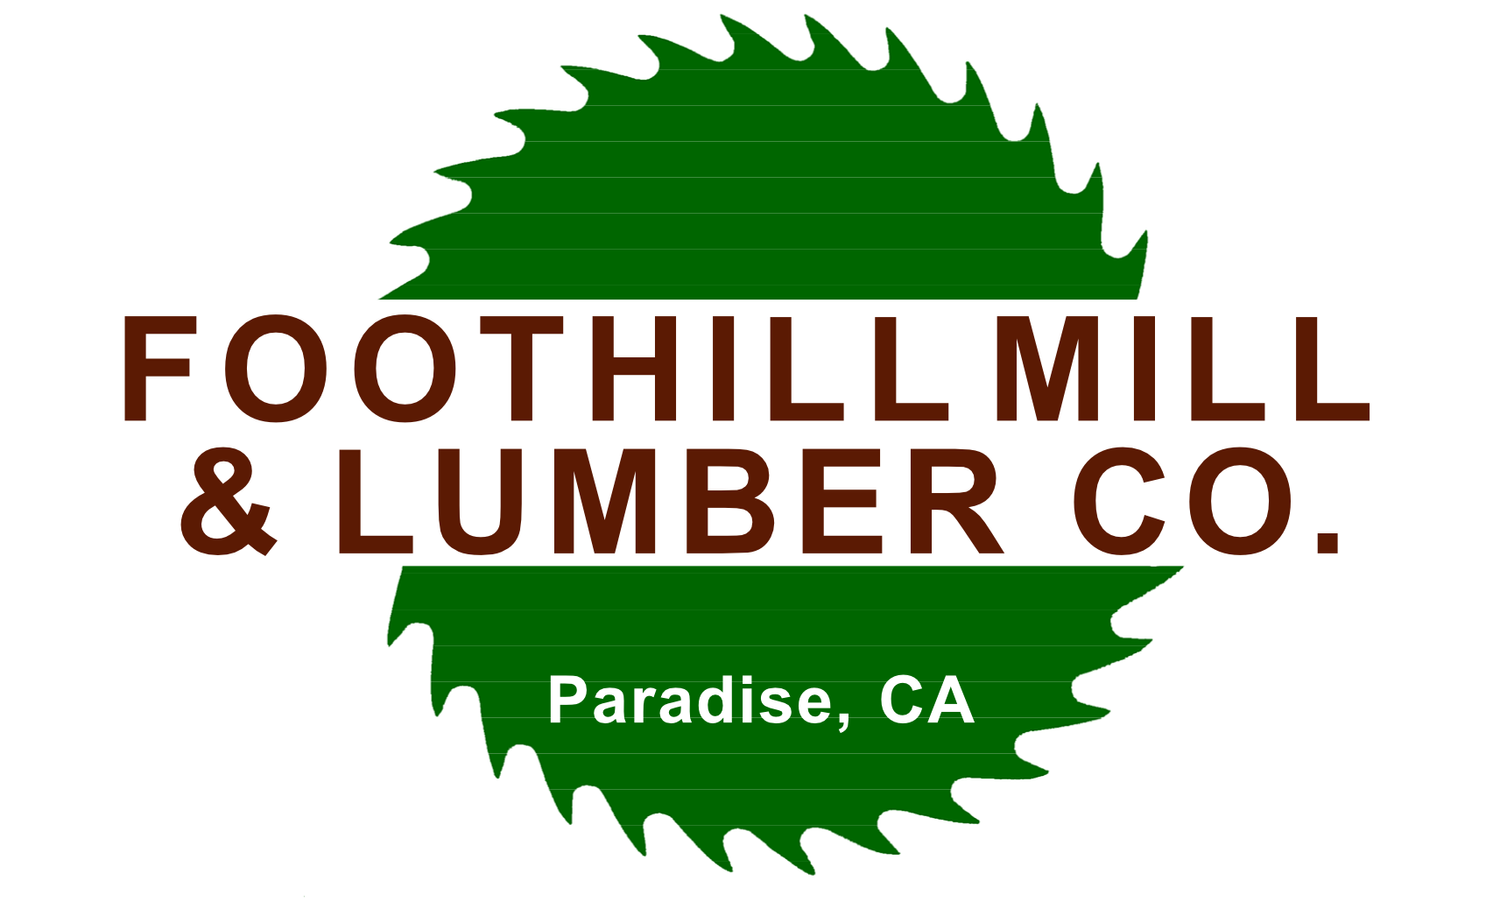 Foothill Mill & Lumber Co.